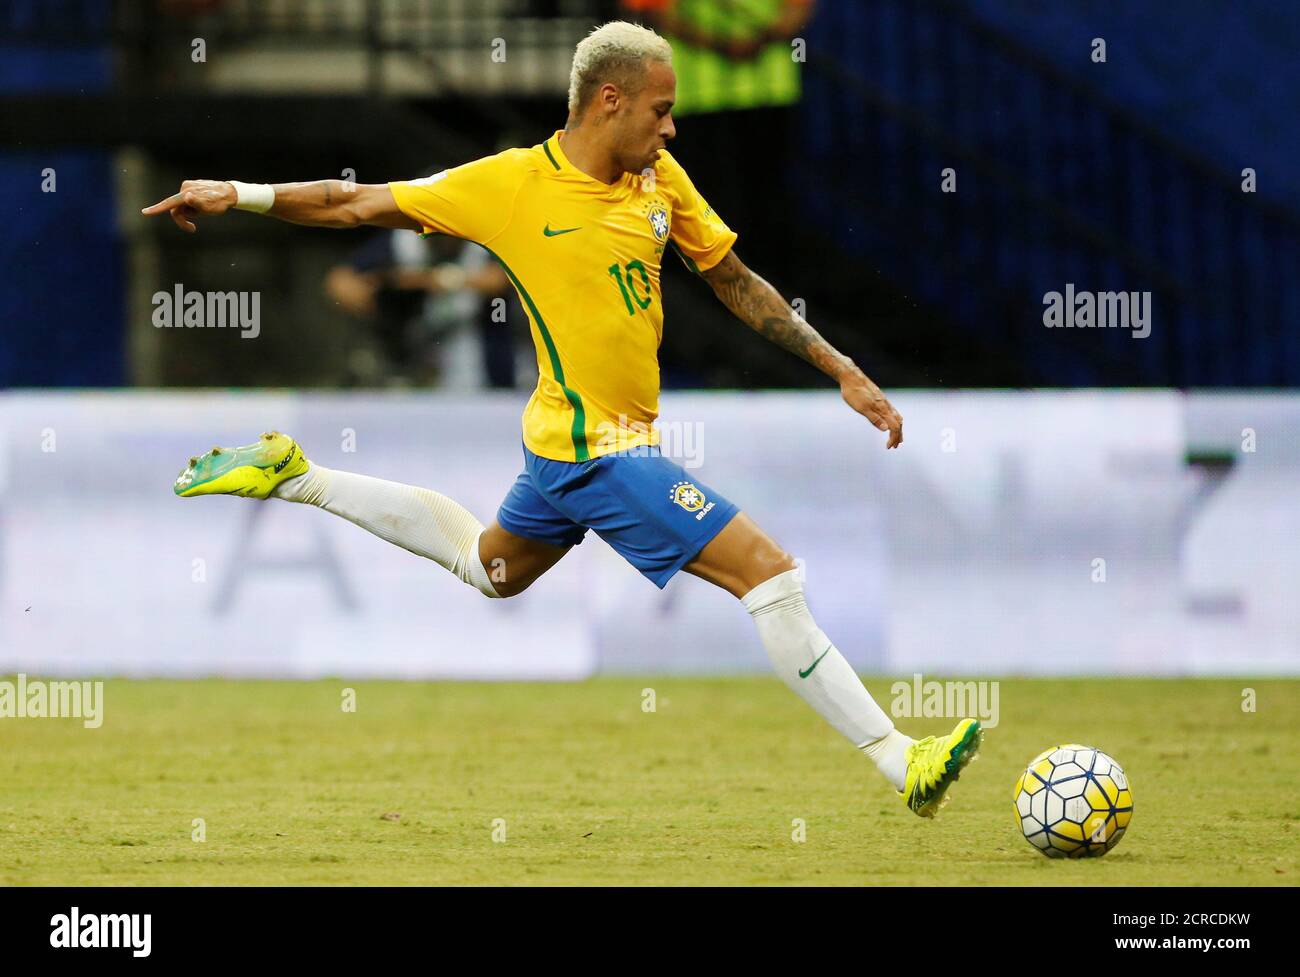 Football Soccer - World Cup 2018 Qualifiers - Brazil v Colombia - Amazonia Arena Stadium, Manaus, Brazil - 6/9/16. Neymar of Brazil in action. REUTERS/Bruno Kelly Stock Photo